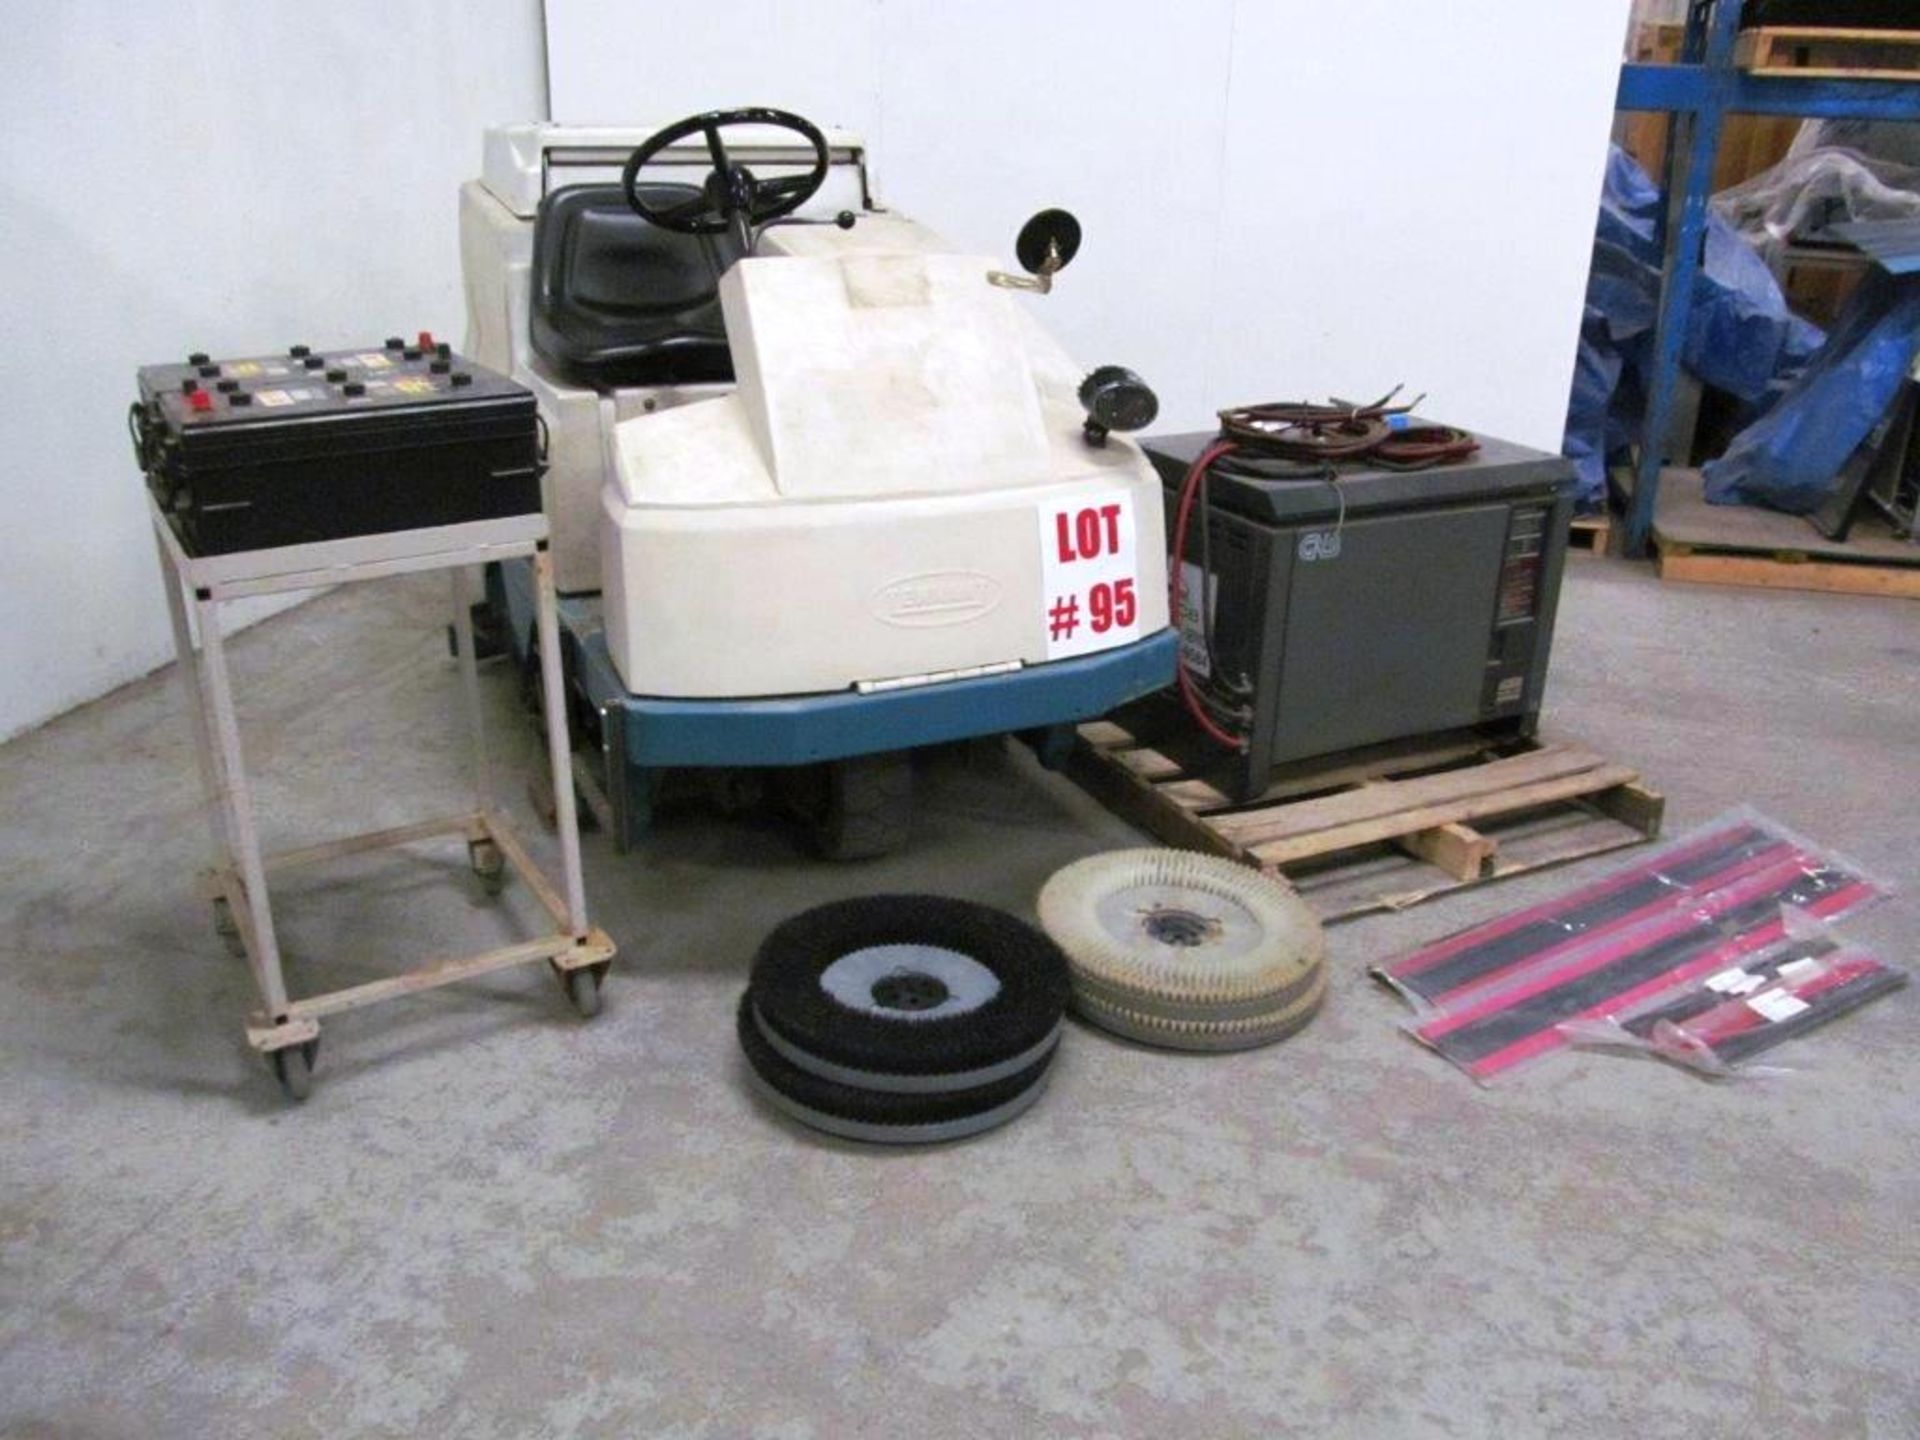 TENNANT FLOOR SWEEPER, ELECTRIC 36V, C/W EXTRA BATTERIES & ACCESSORIES, CONDITION UNKNOWN - Image 3 of 8